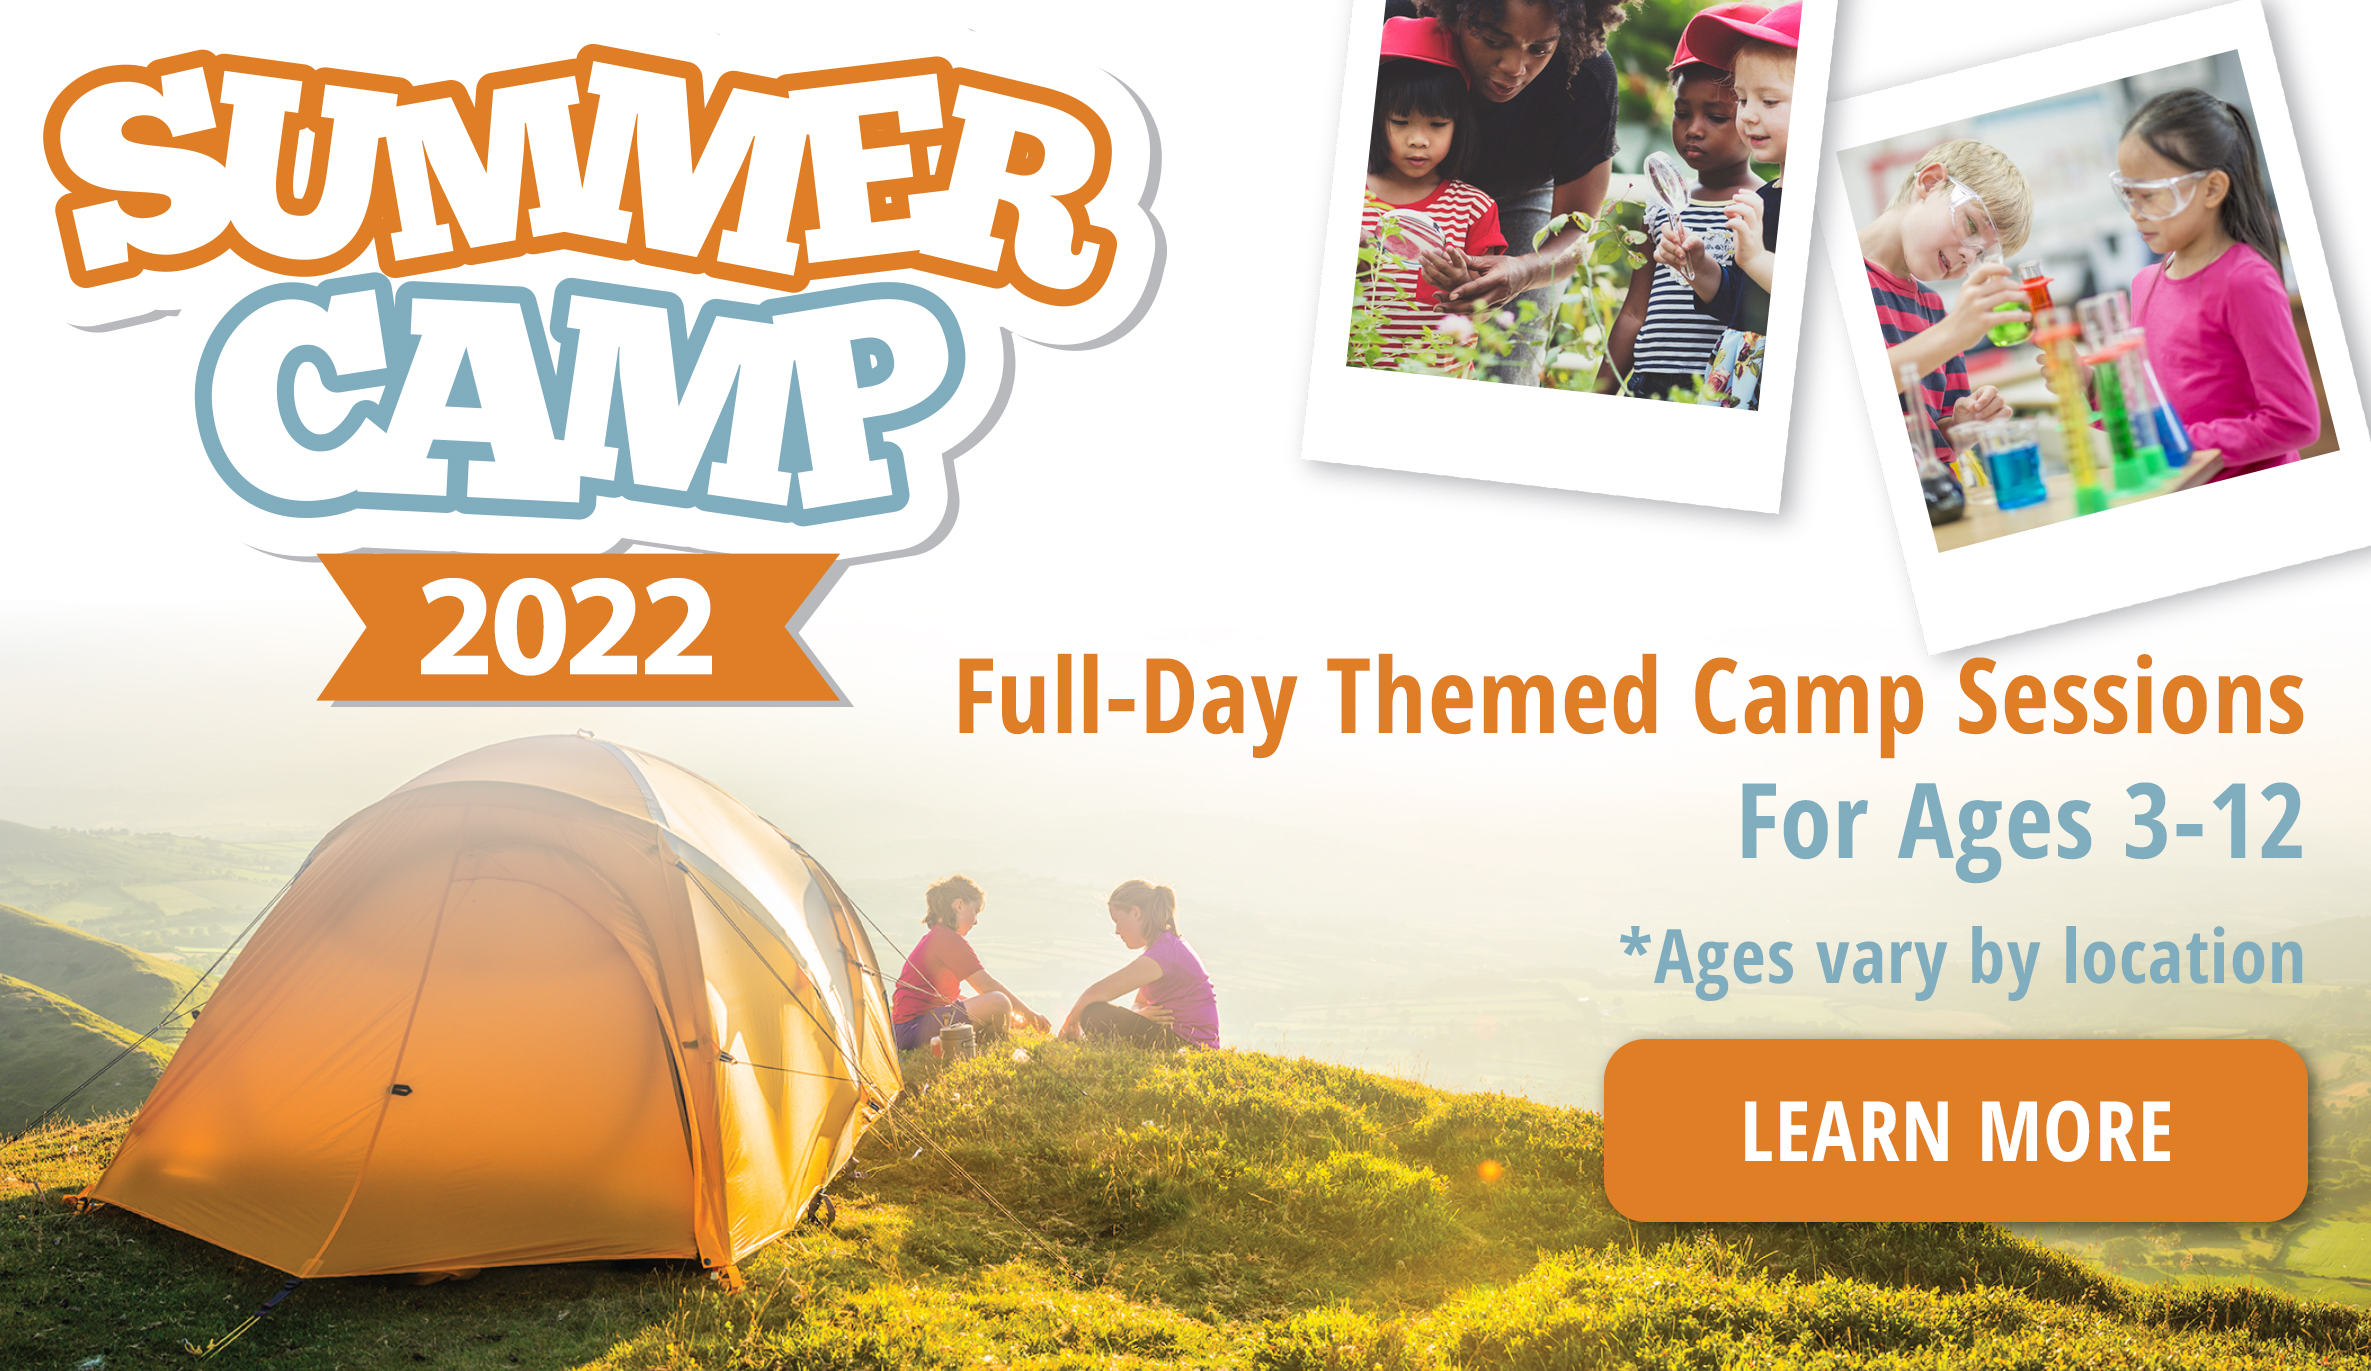 Summer Camp 2022 - Full Day Themed Camp Sessions For Ages 3-12